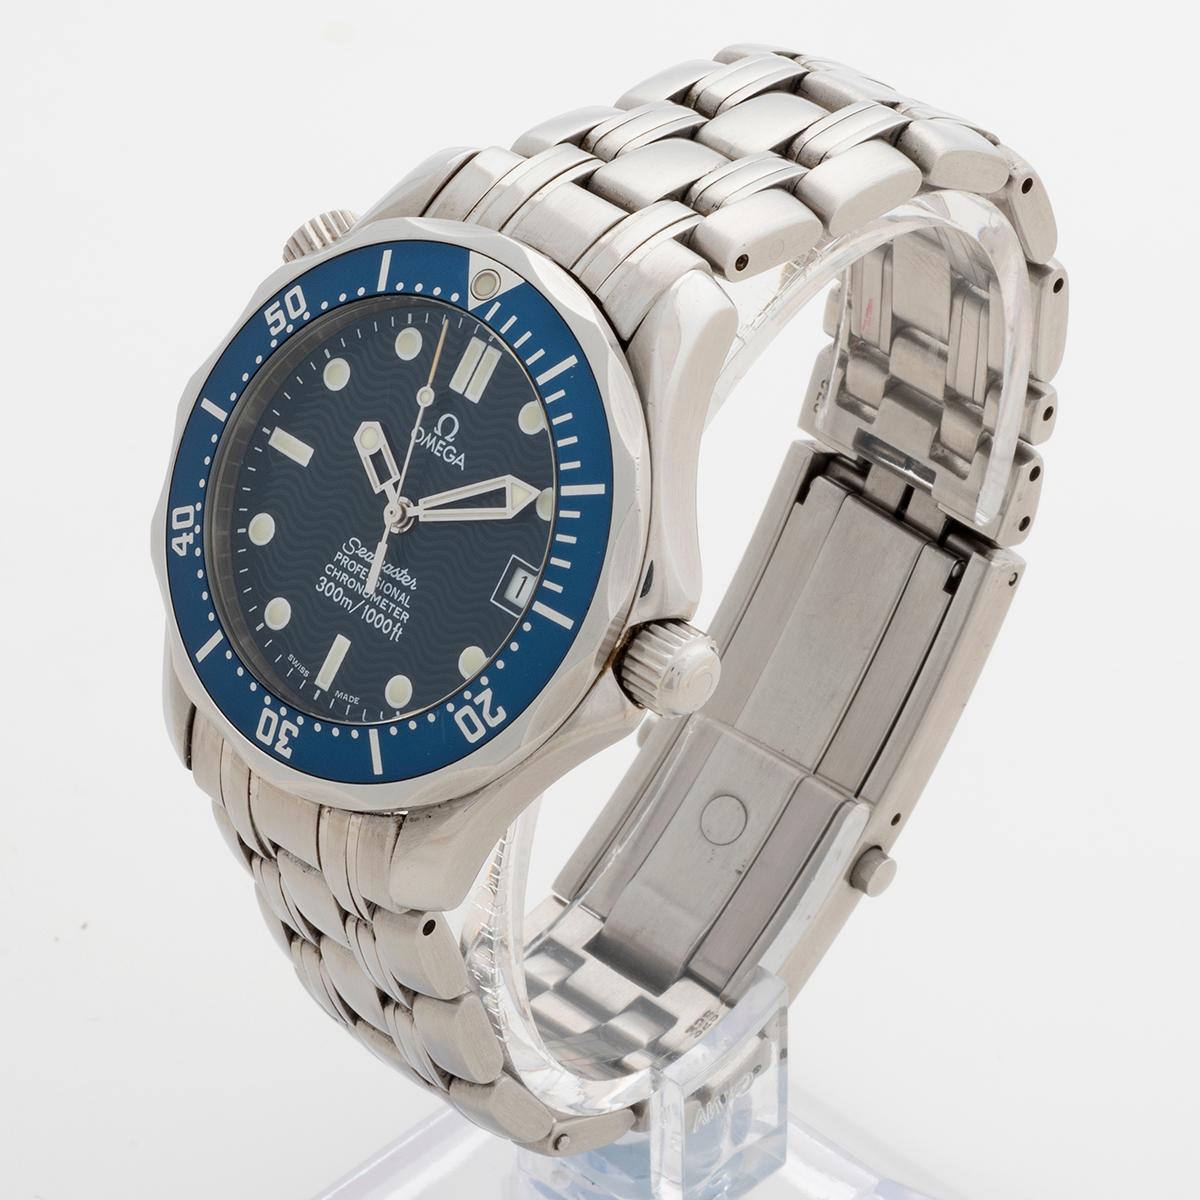 Women's or Men's Omega Seamaster 300M Professional Mid Size. Blue Wave Dial, Full Set, Year 2000.